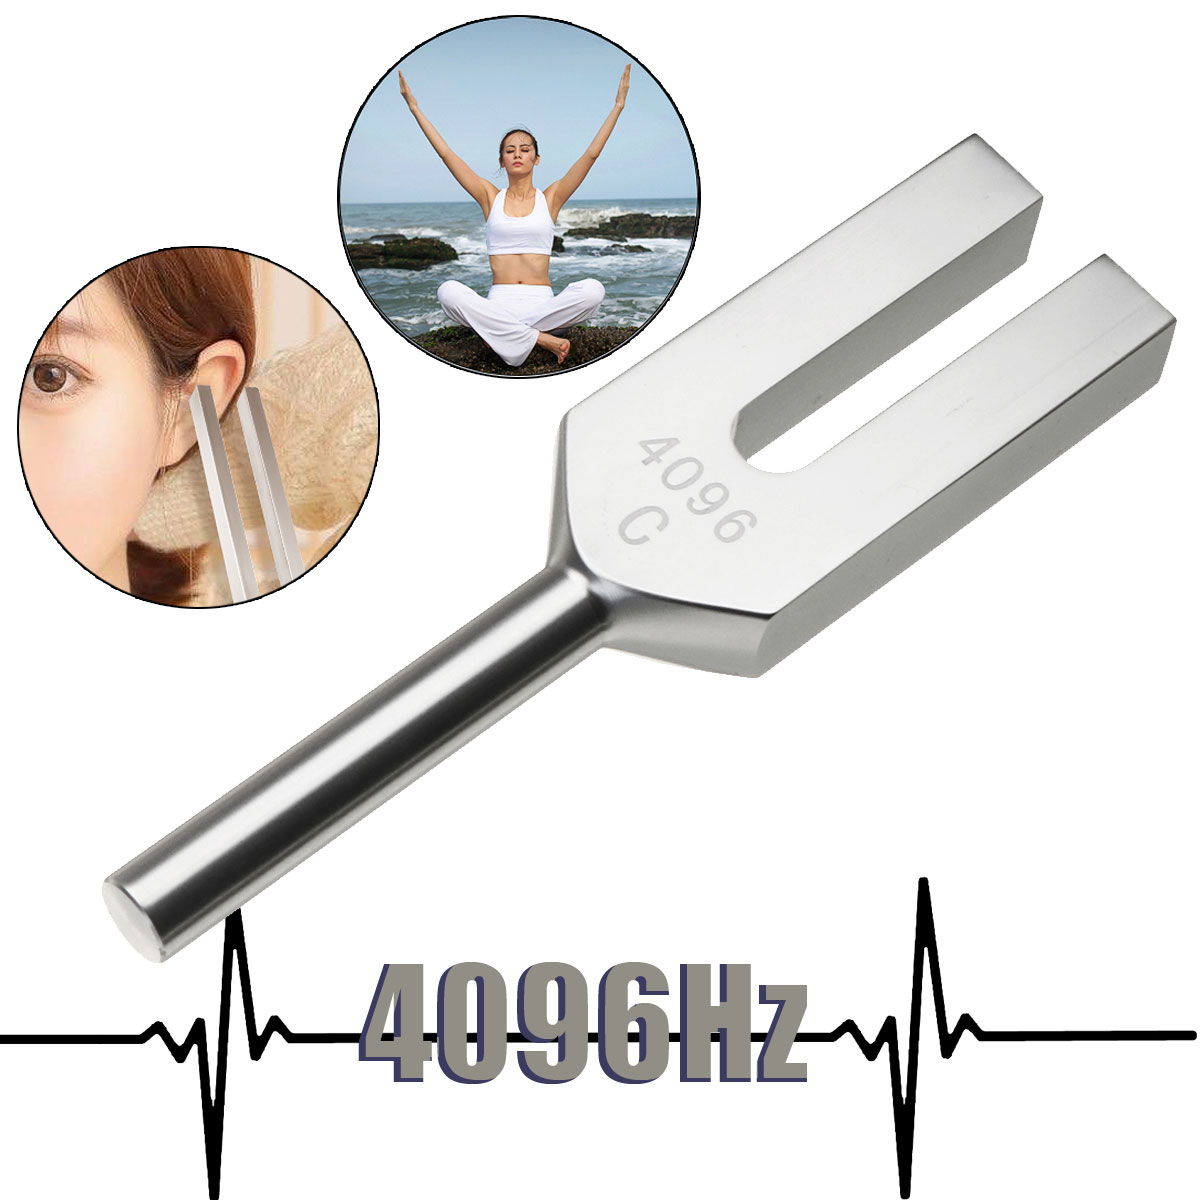 4096Hz-Aluminum-Musical-Tuning-Fork-Instrument-for-Healing-Sound-Vibration-Therapy-Tools-1282655-6